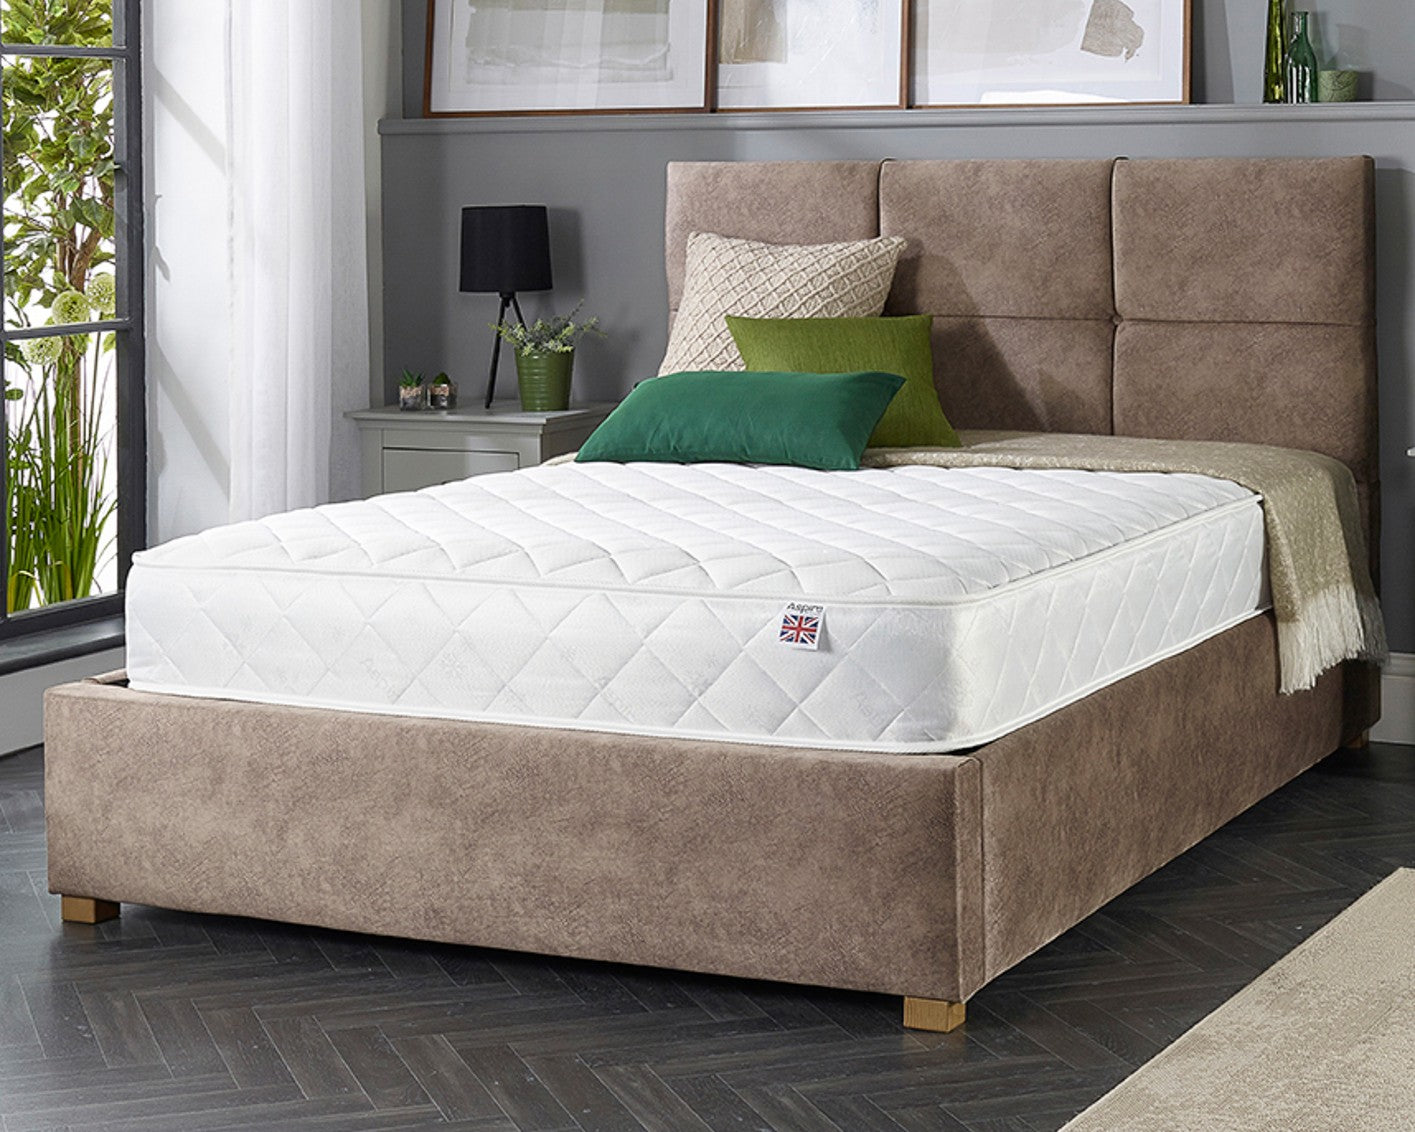 Aspire Double Comfort Memory Rolled Mattress With Bed-Better Bed Company